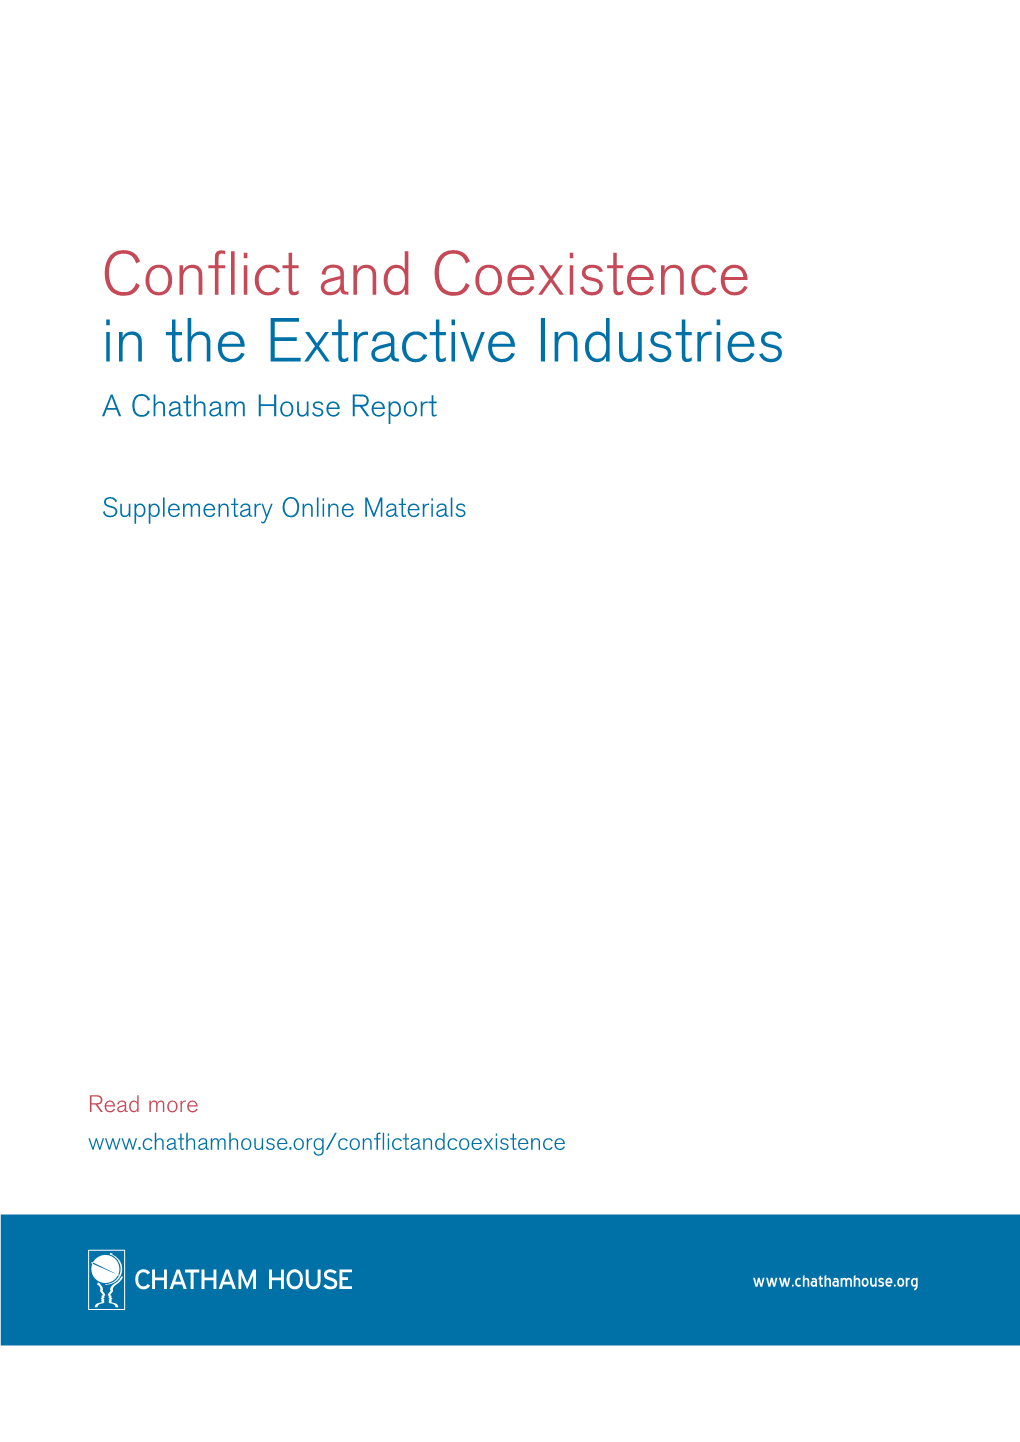 Conflict and Coexistence in the Extractive Industries a Chatham House Report